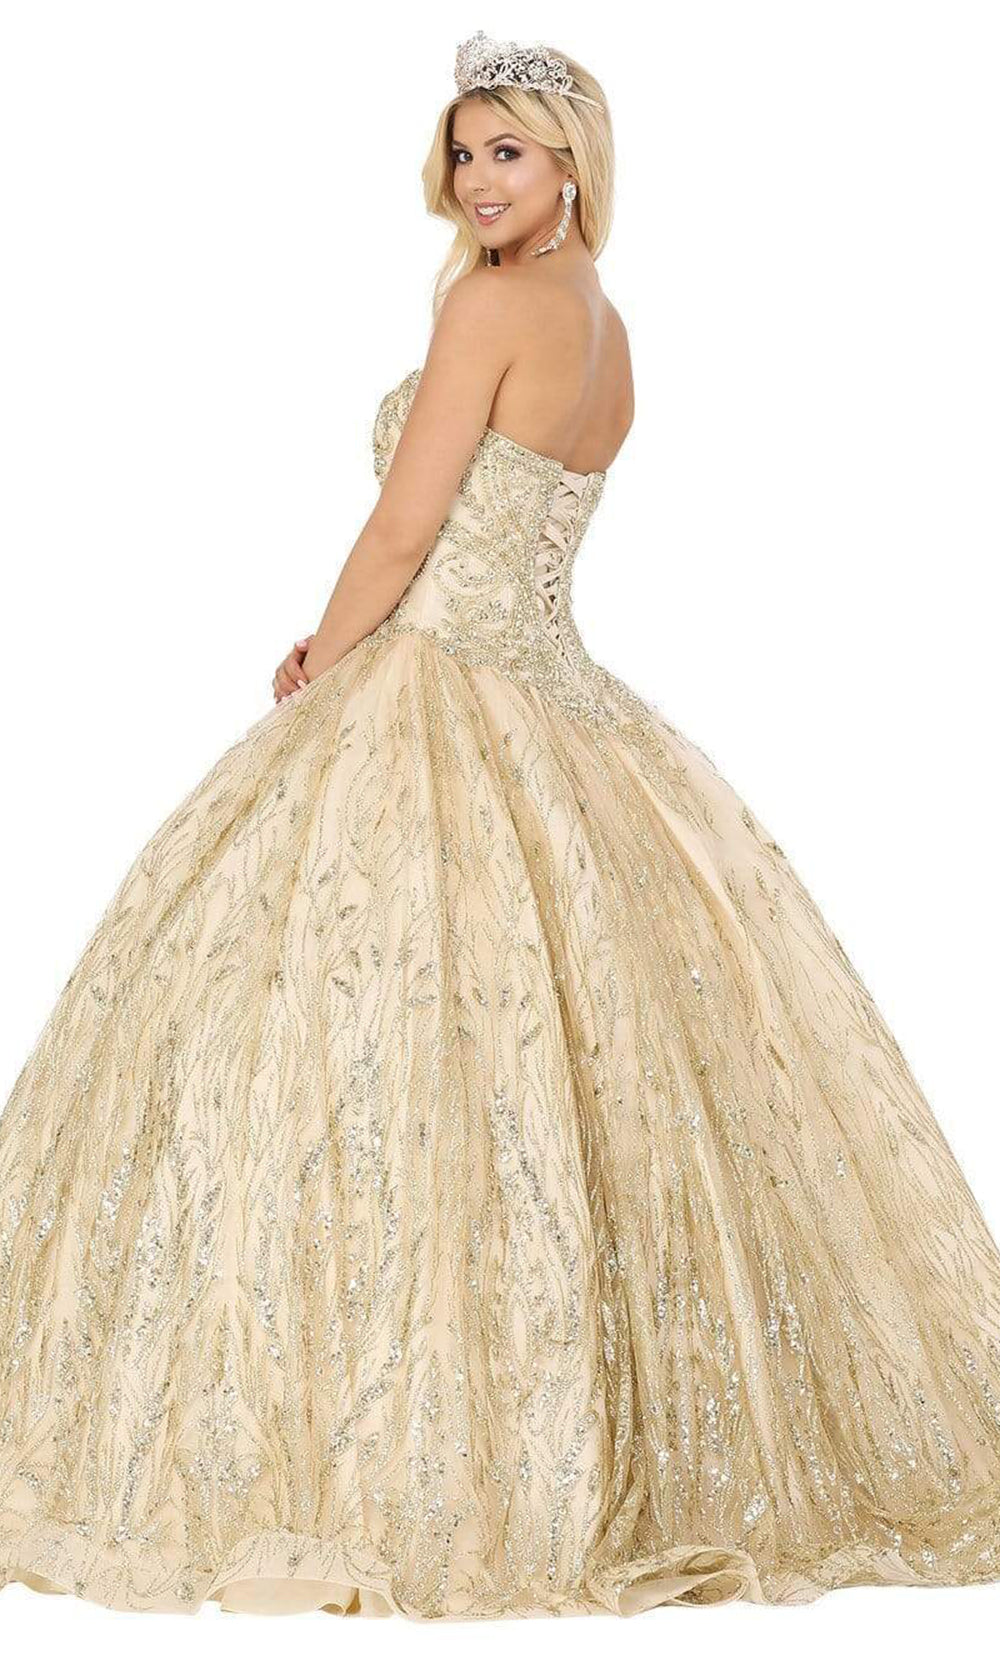 Dancing Queen - Strapless Ornate Sweetheart Ballgown 1497SC In Gold